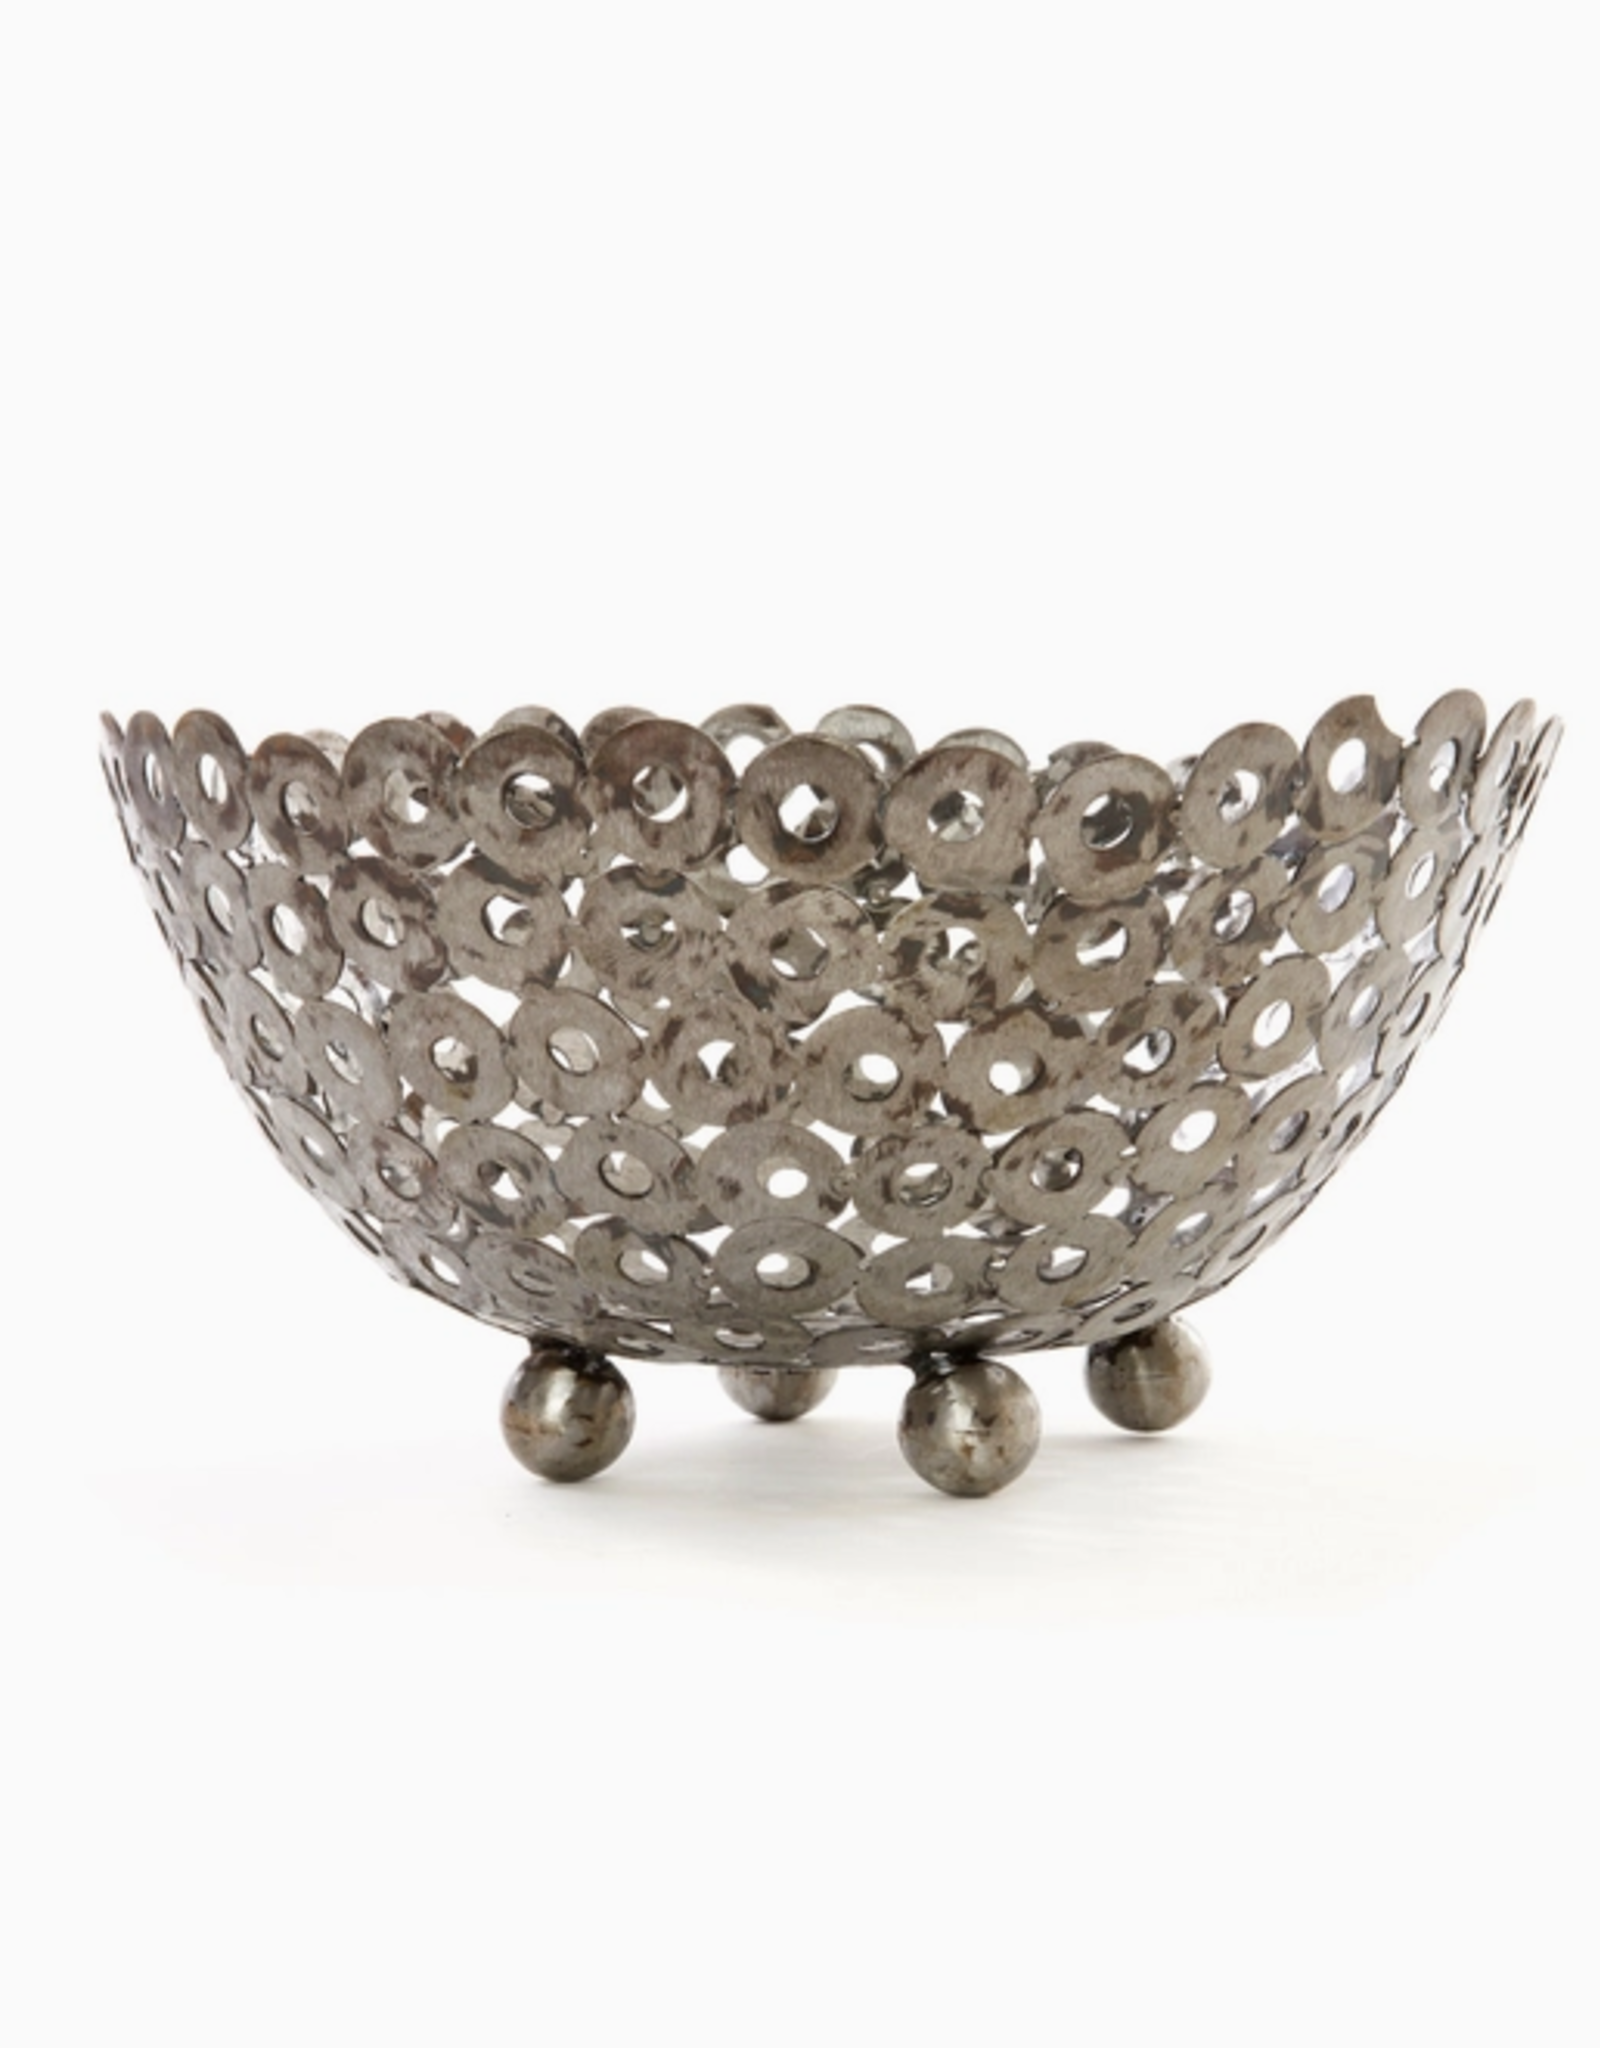 Swahili African Modern Small Recycled Metal Display Bowls